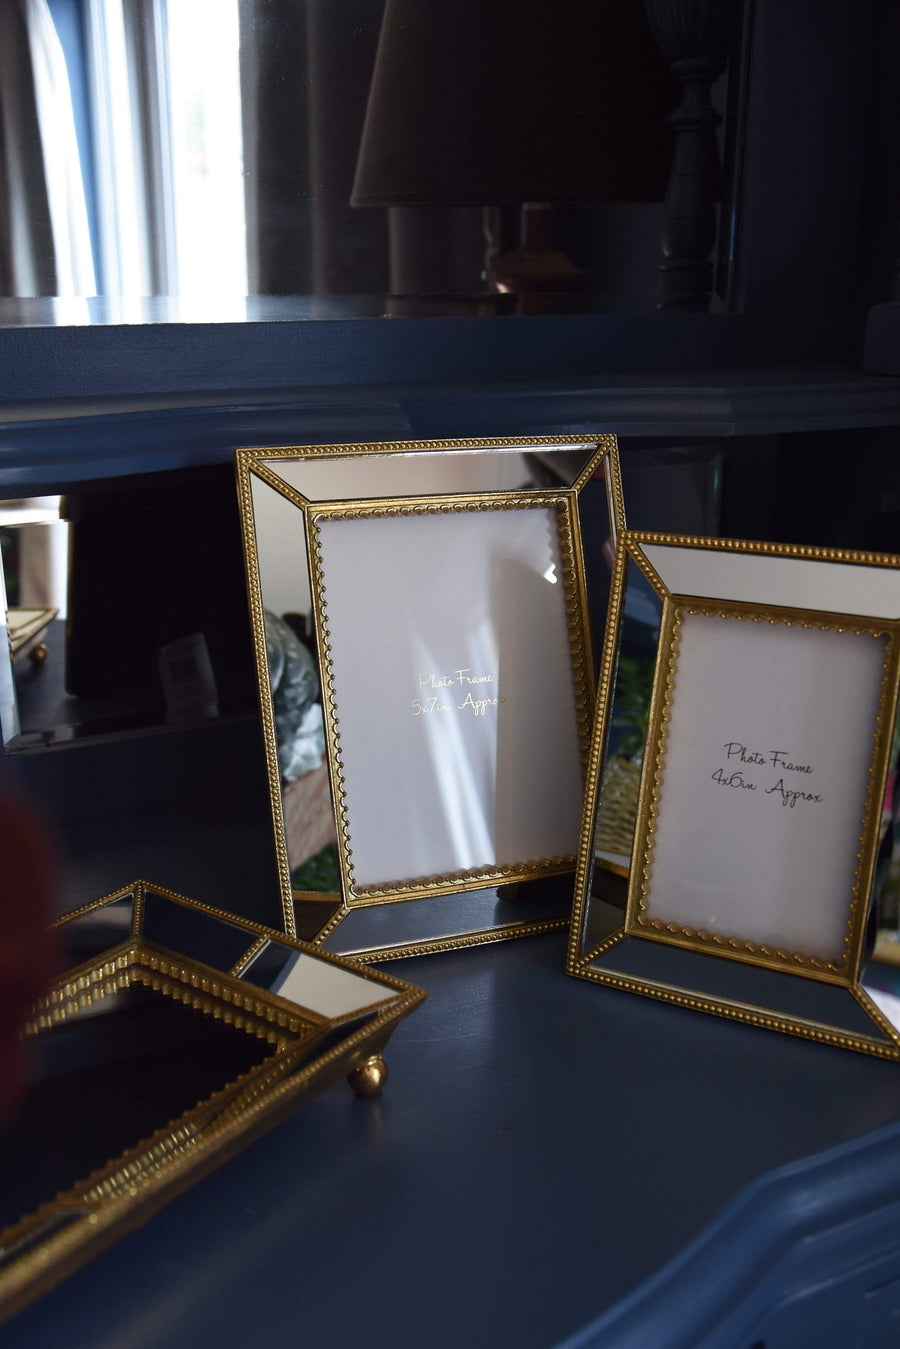 ESME Home Ornate Mirrored and Gold Photo Frame 5x7"